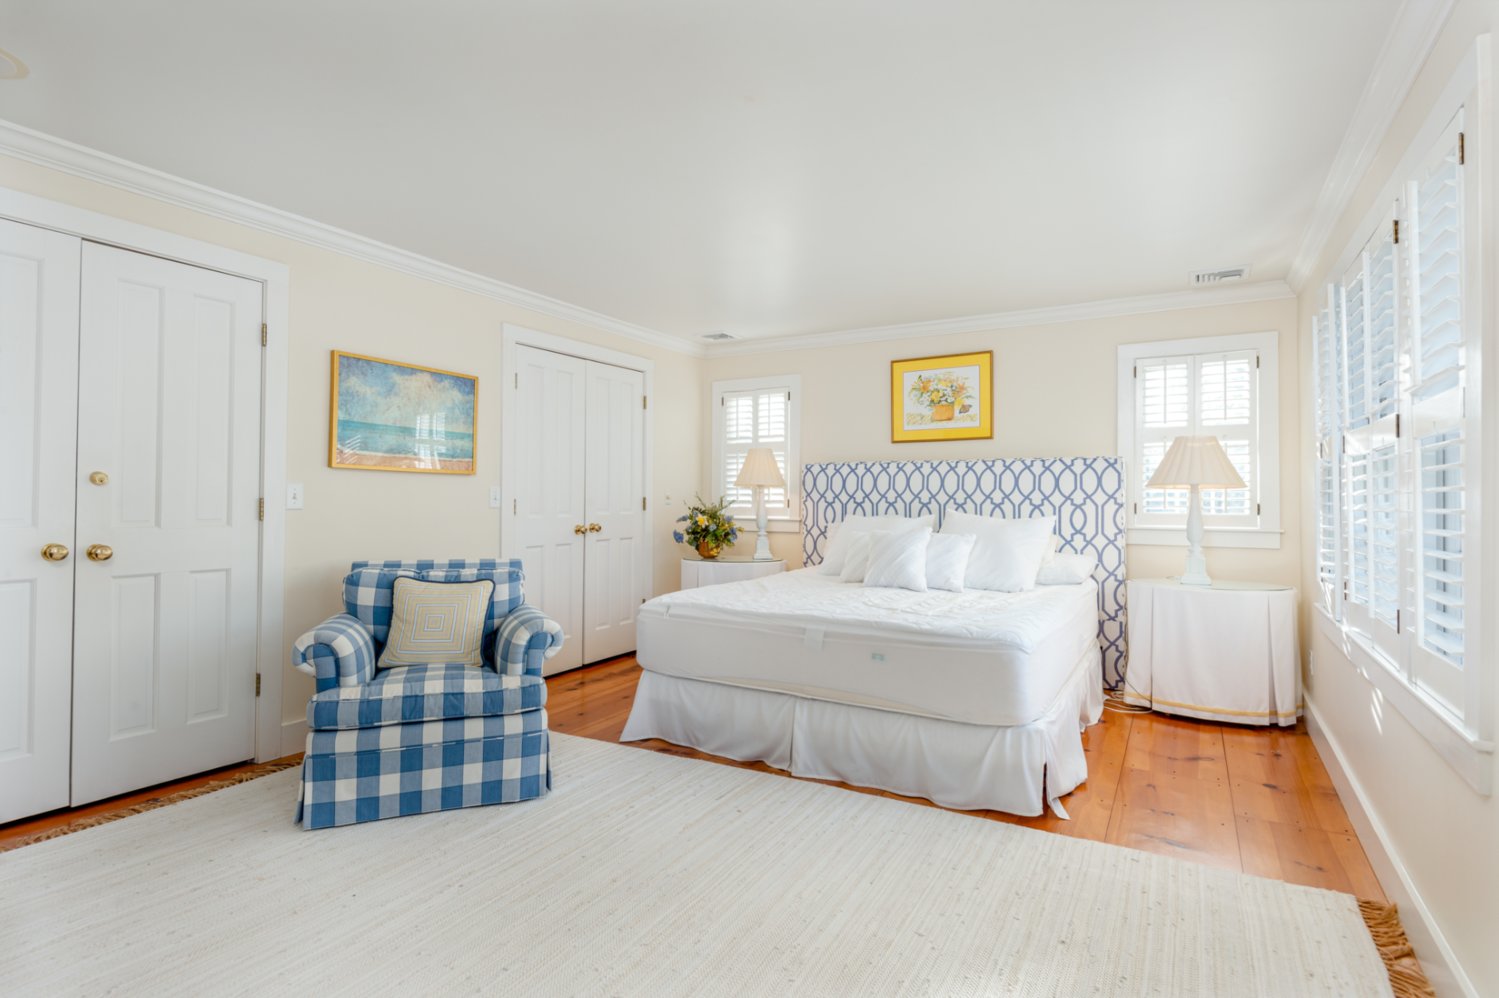 The master bedroom has ample closet space and access to a private deck.